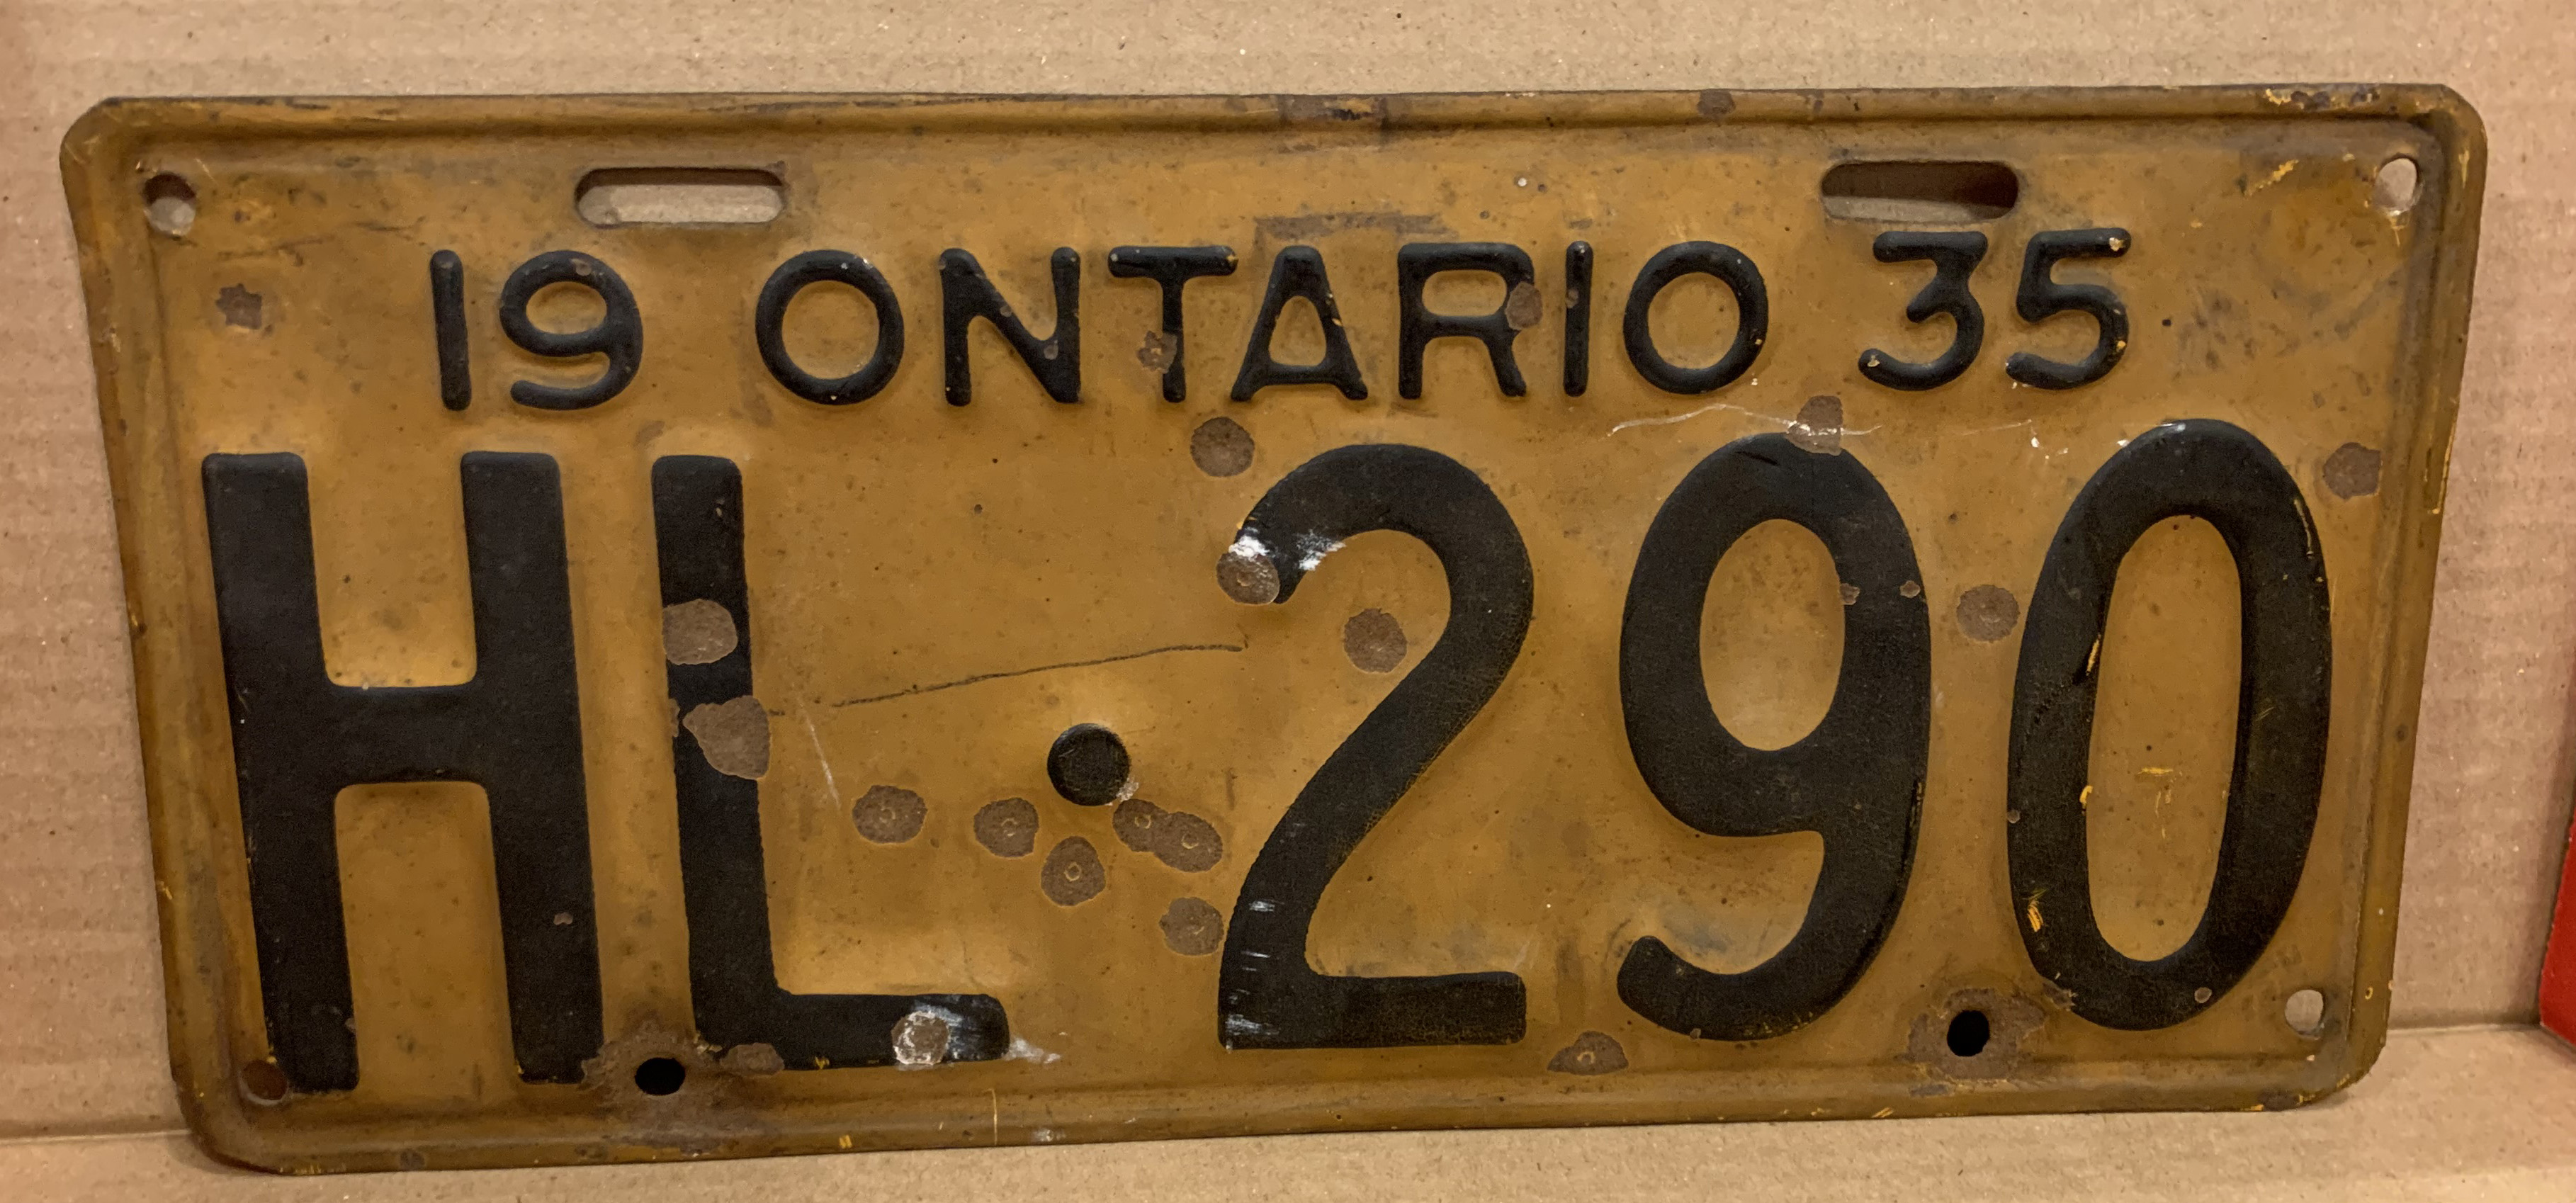 colour%20photo%20showing%20Ontario%20license%20plate%20from%201935